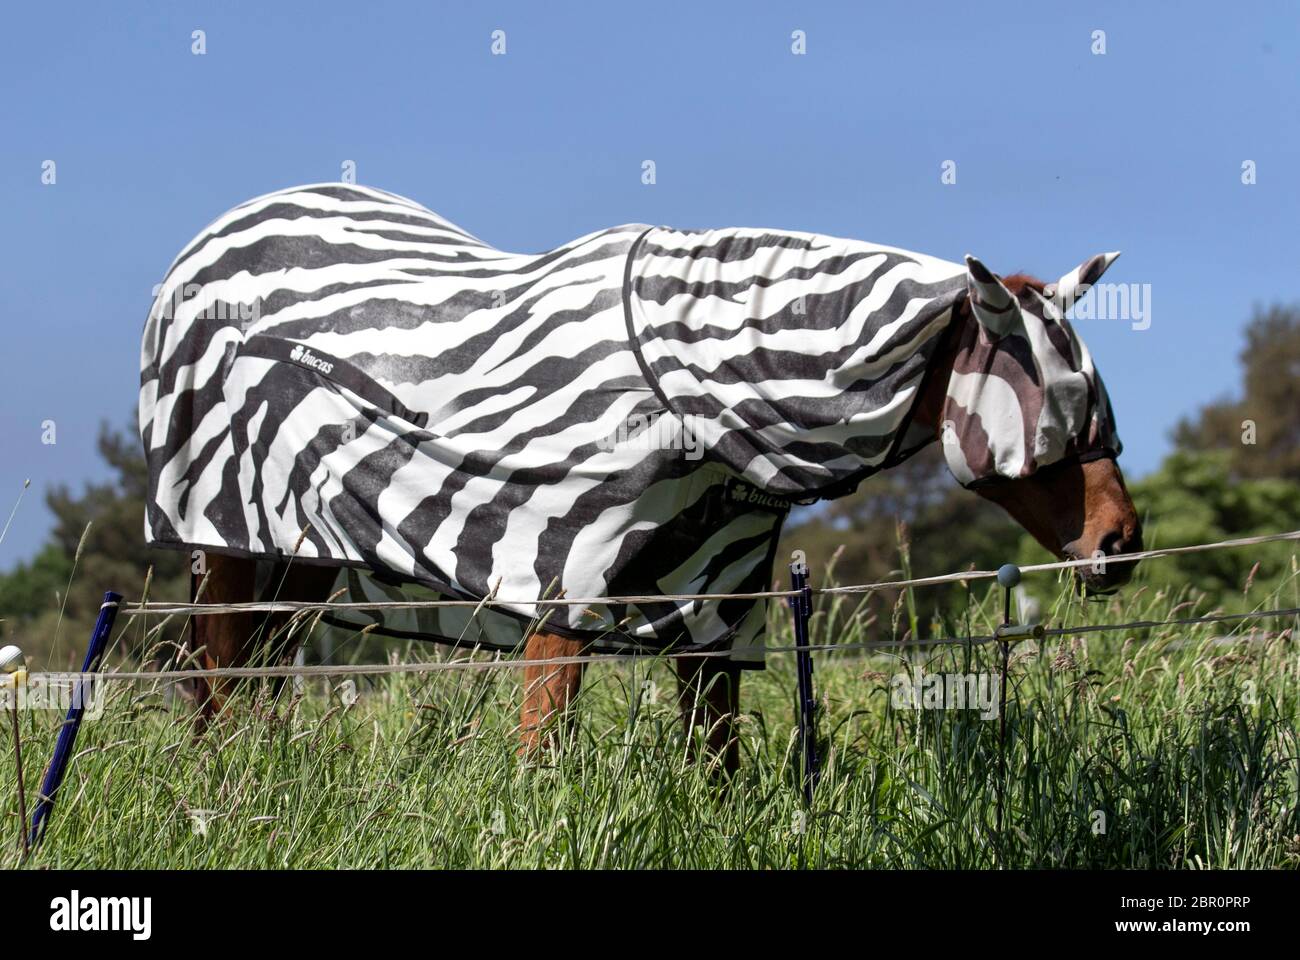 Horse wearing lightweight Horse Fly Rug, fly rugs, horse summer turnout sheet, sunburn rug, sweet-itch rugs, bug rugs and sheets. Combo Turnout With Belly Strap Zebra. A Full Neck Zebra rug provides protection of the body and neck of the horse in hot weather and helps to prevent pink skinned horses from becoming sunburnt. Flies find zebra stripes confusing and don't like to land on striped surfaces and so zebra print fly rugs are becoming increasingly popular. Stock Photo